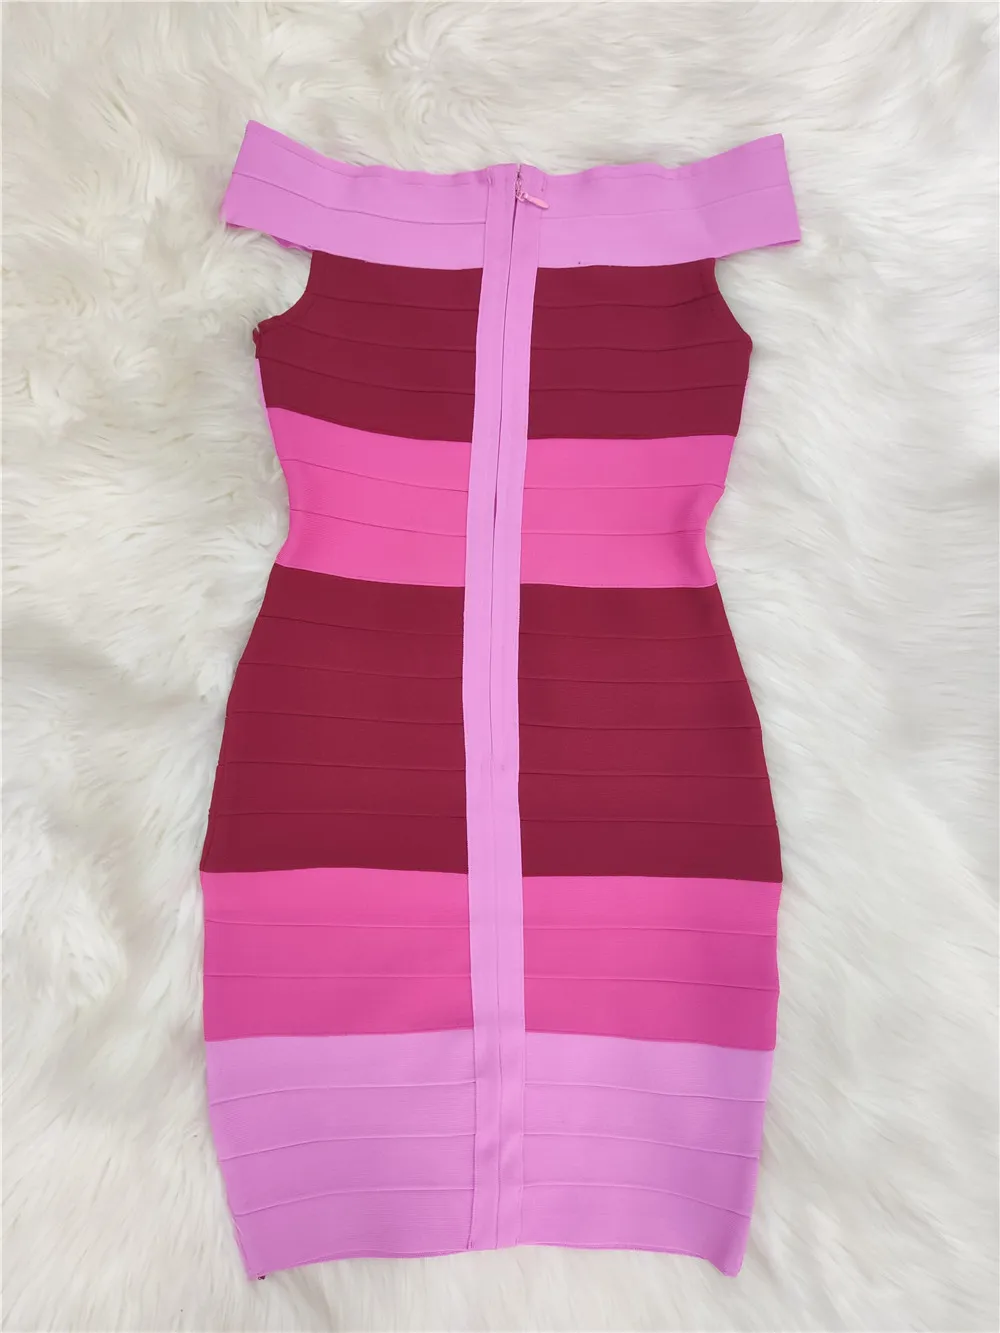 High Quality Pink Striped Off The Shoulder Bodycon Rayon Bandage Dress Elegant Club Party Dress